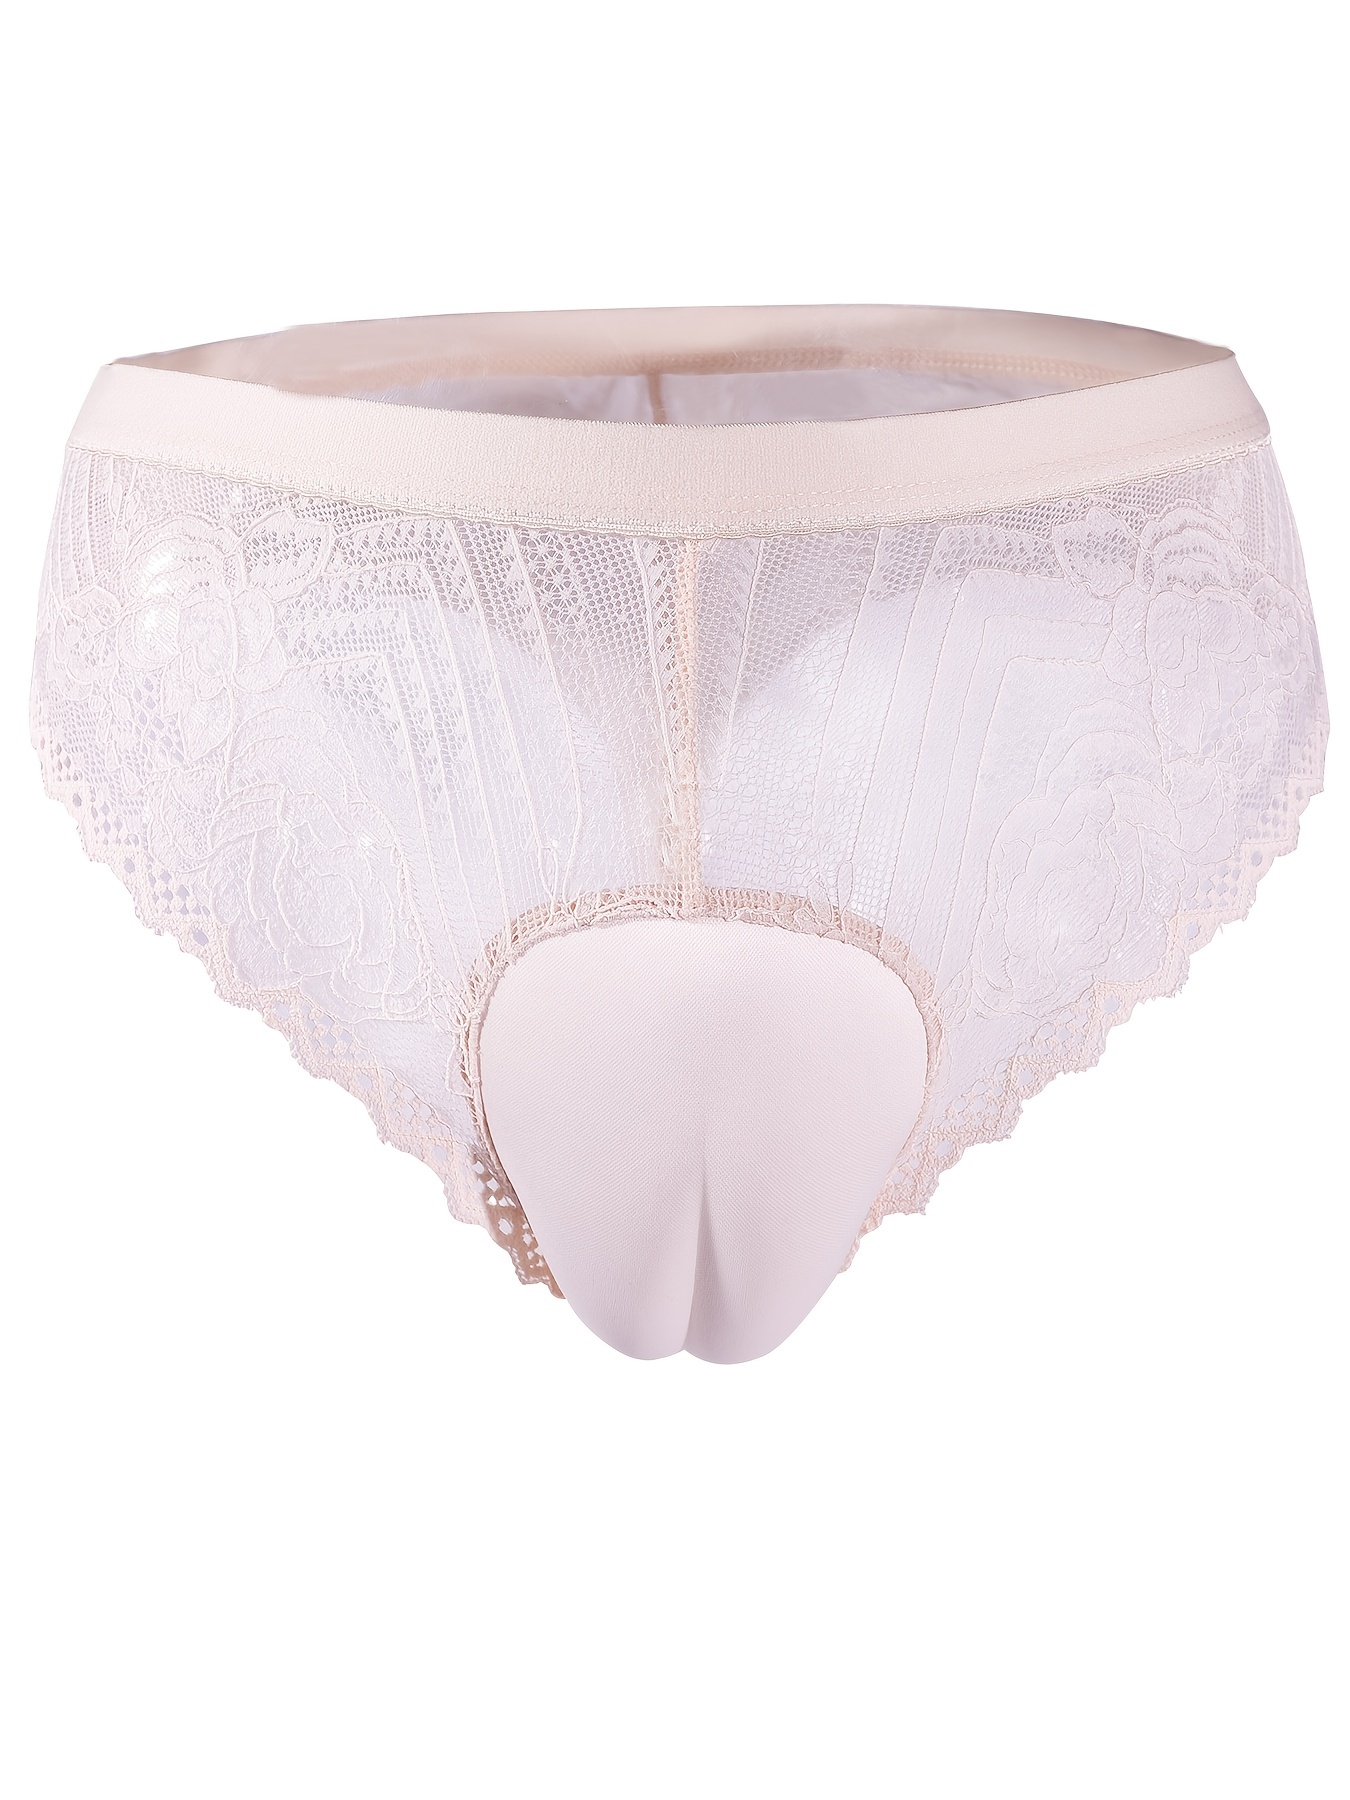 Men's Sexy Lace Hiding Gaff Panty, Breathable Quick Drying Briefs